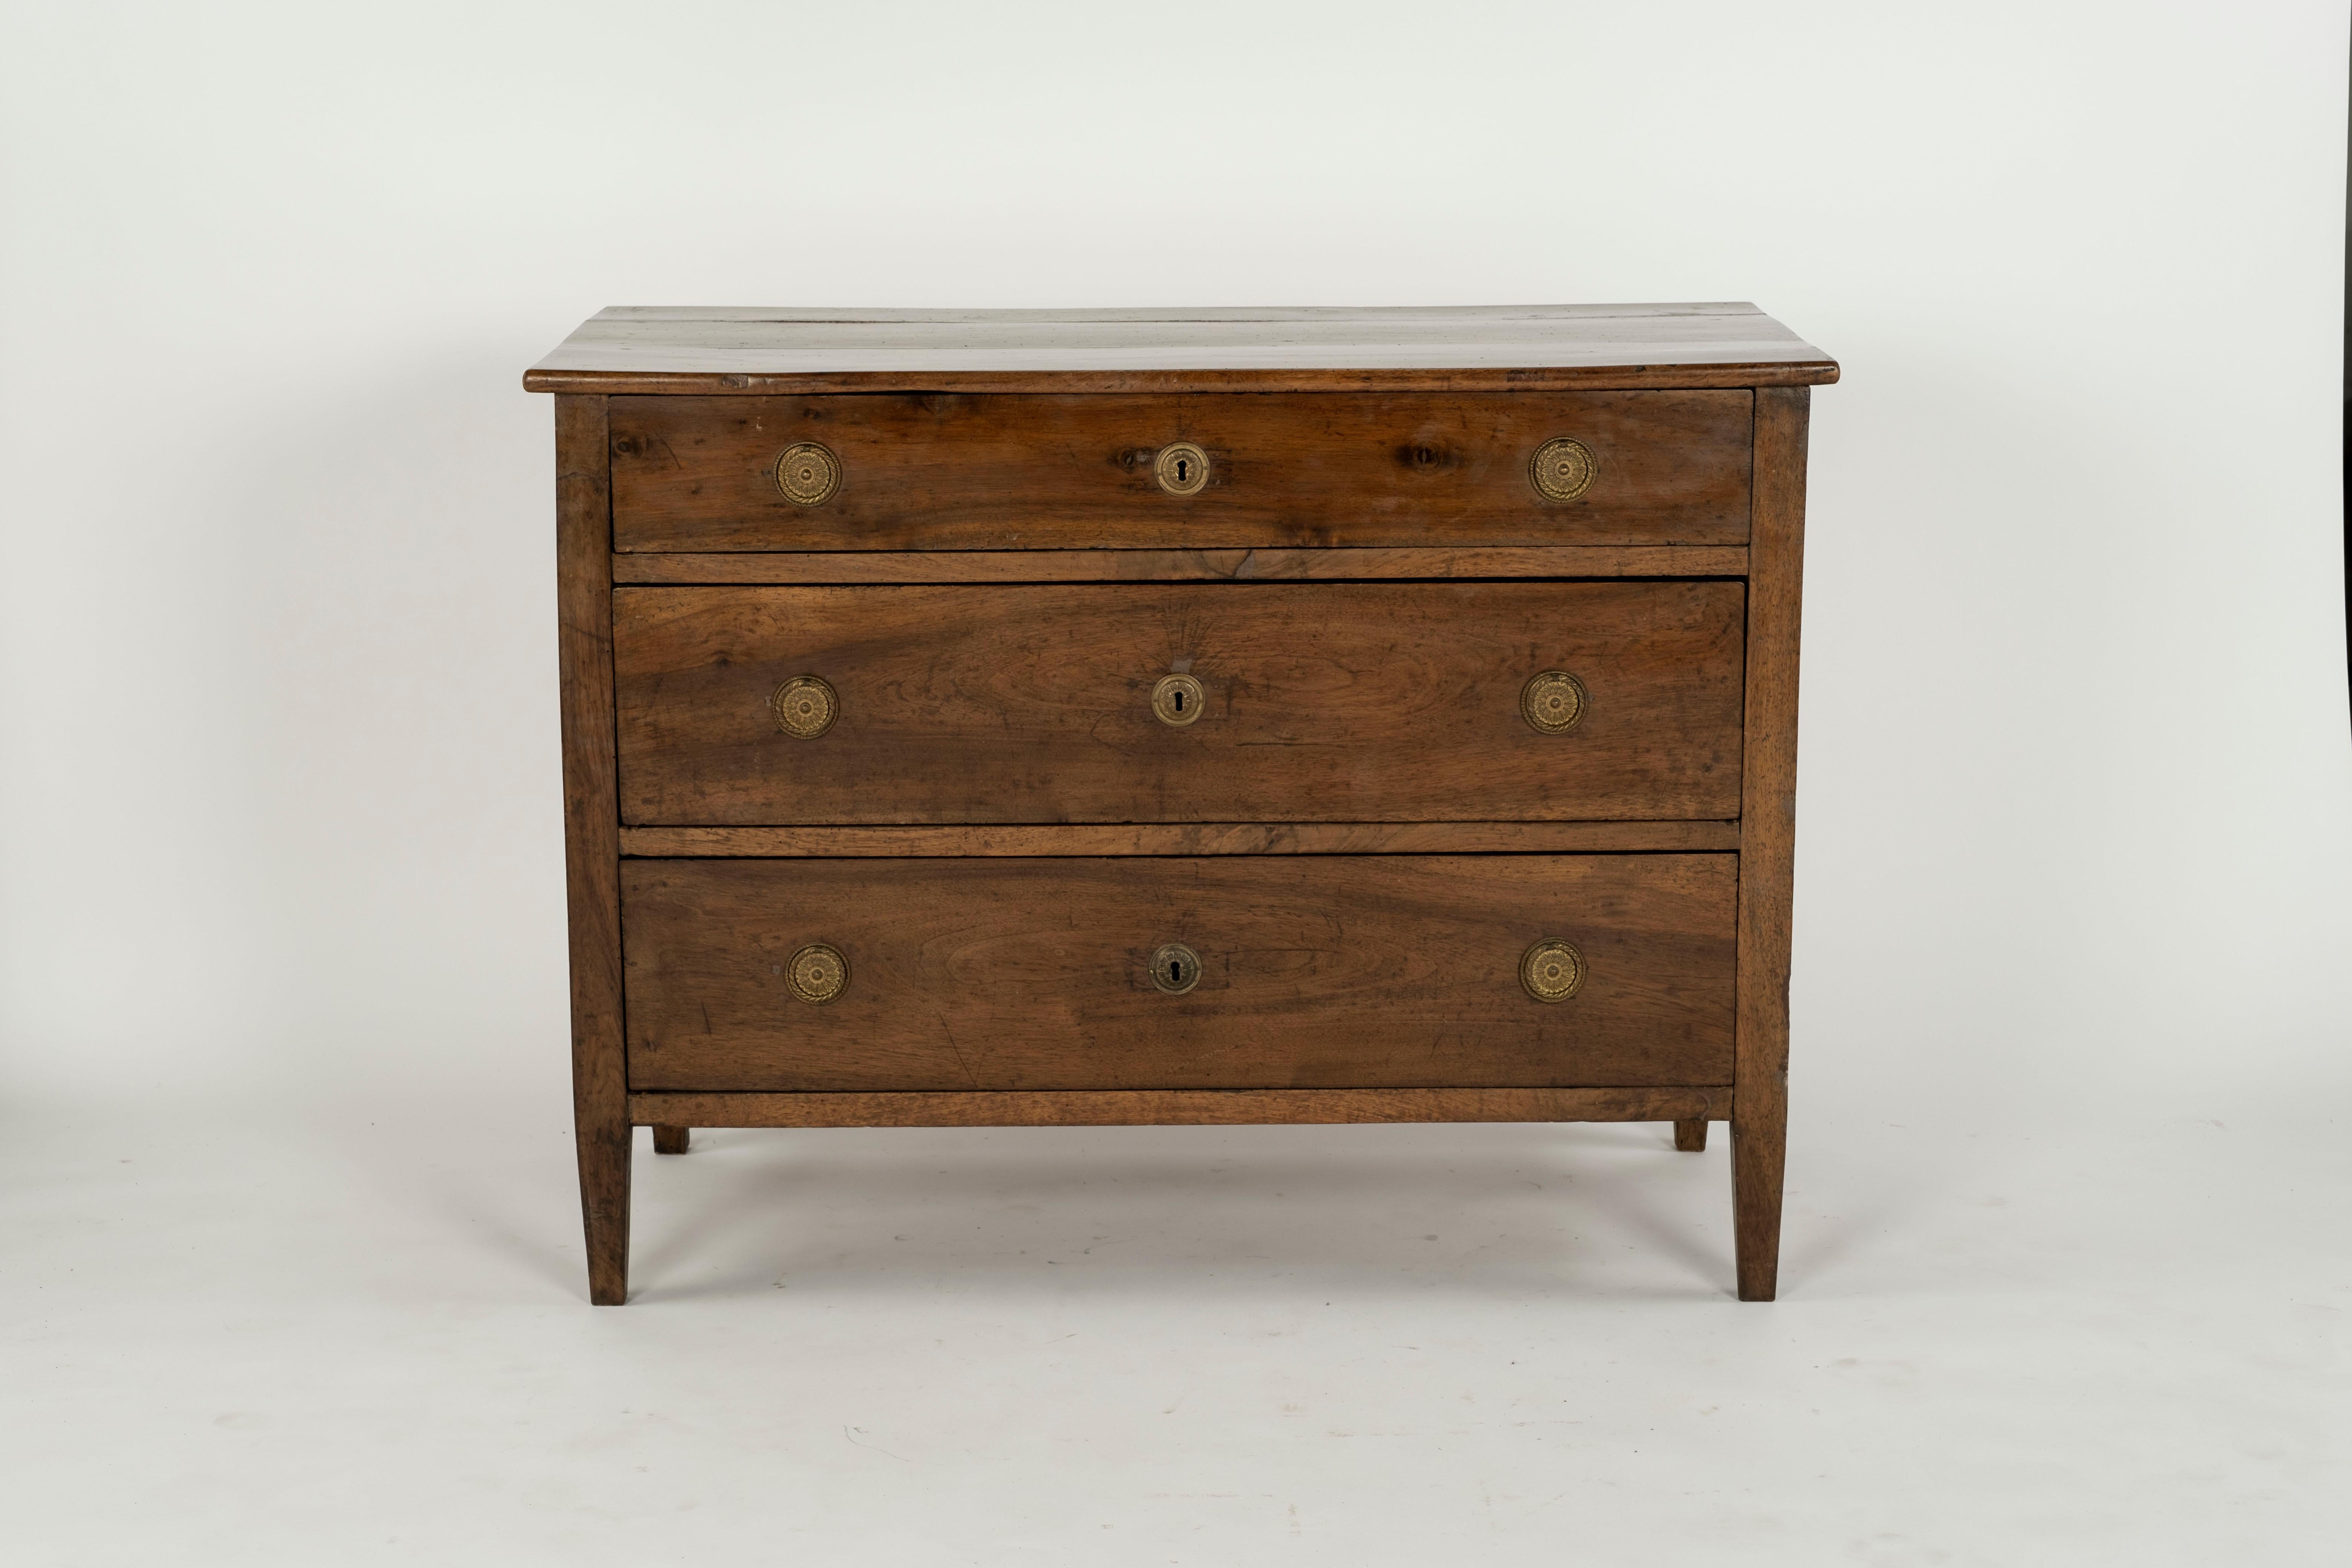 Antique Italian walnut commode, 18th/ 19th c., three drawers with ring pulls, rising on tapered square legs, later hardware.